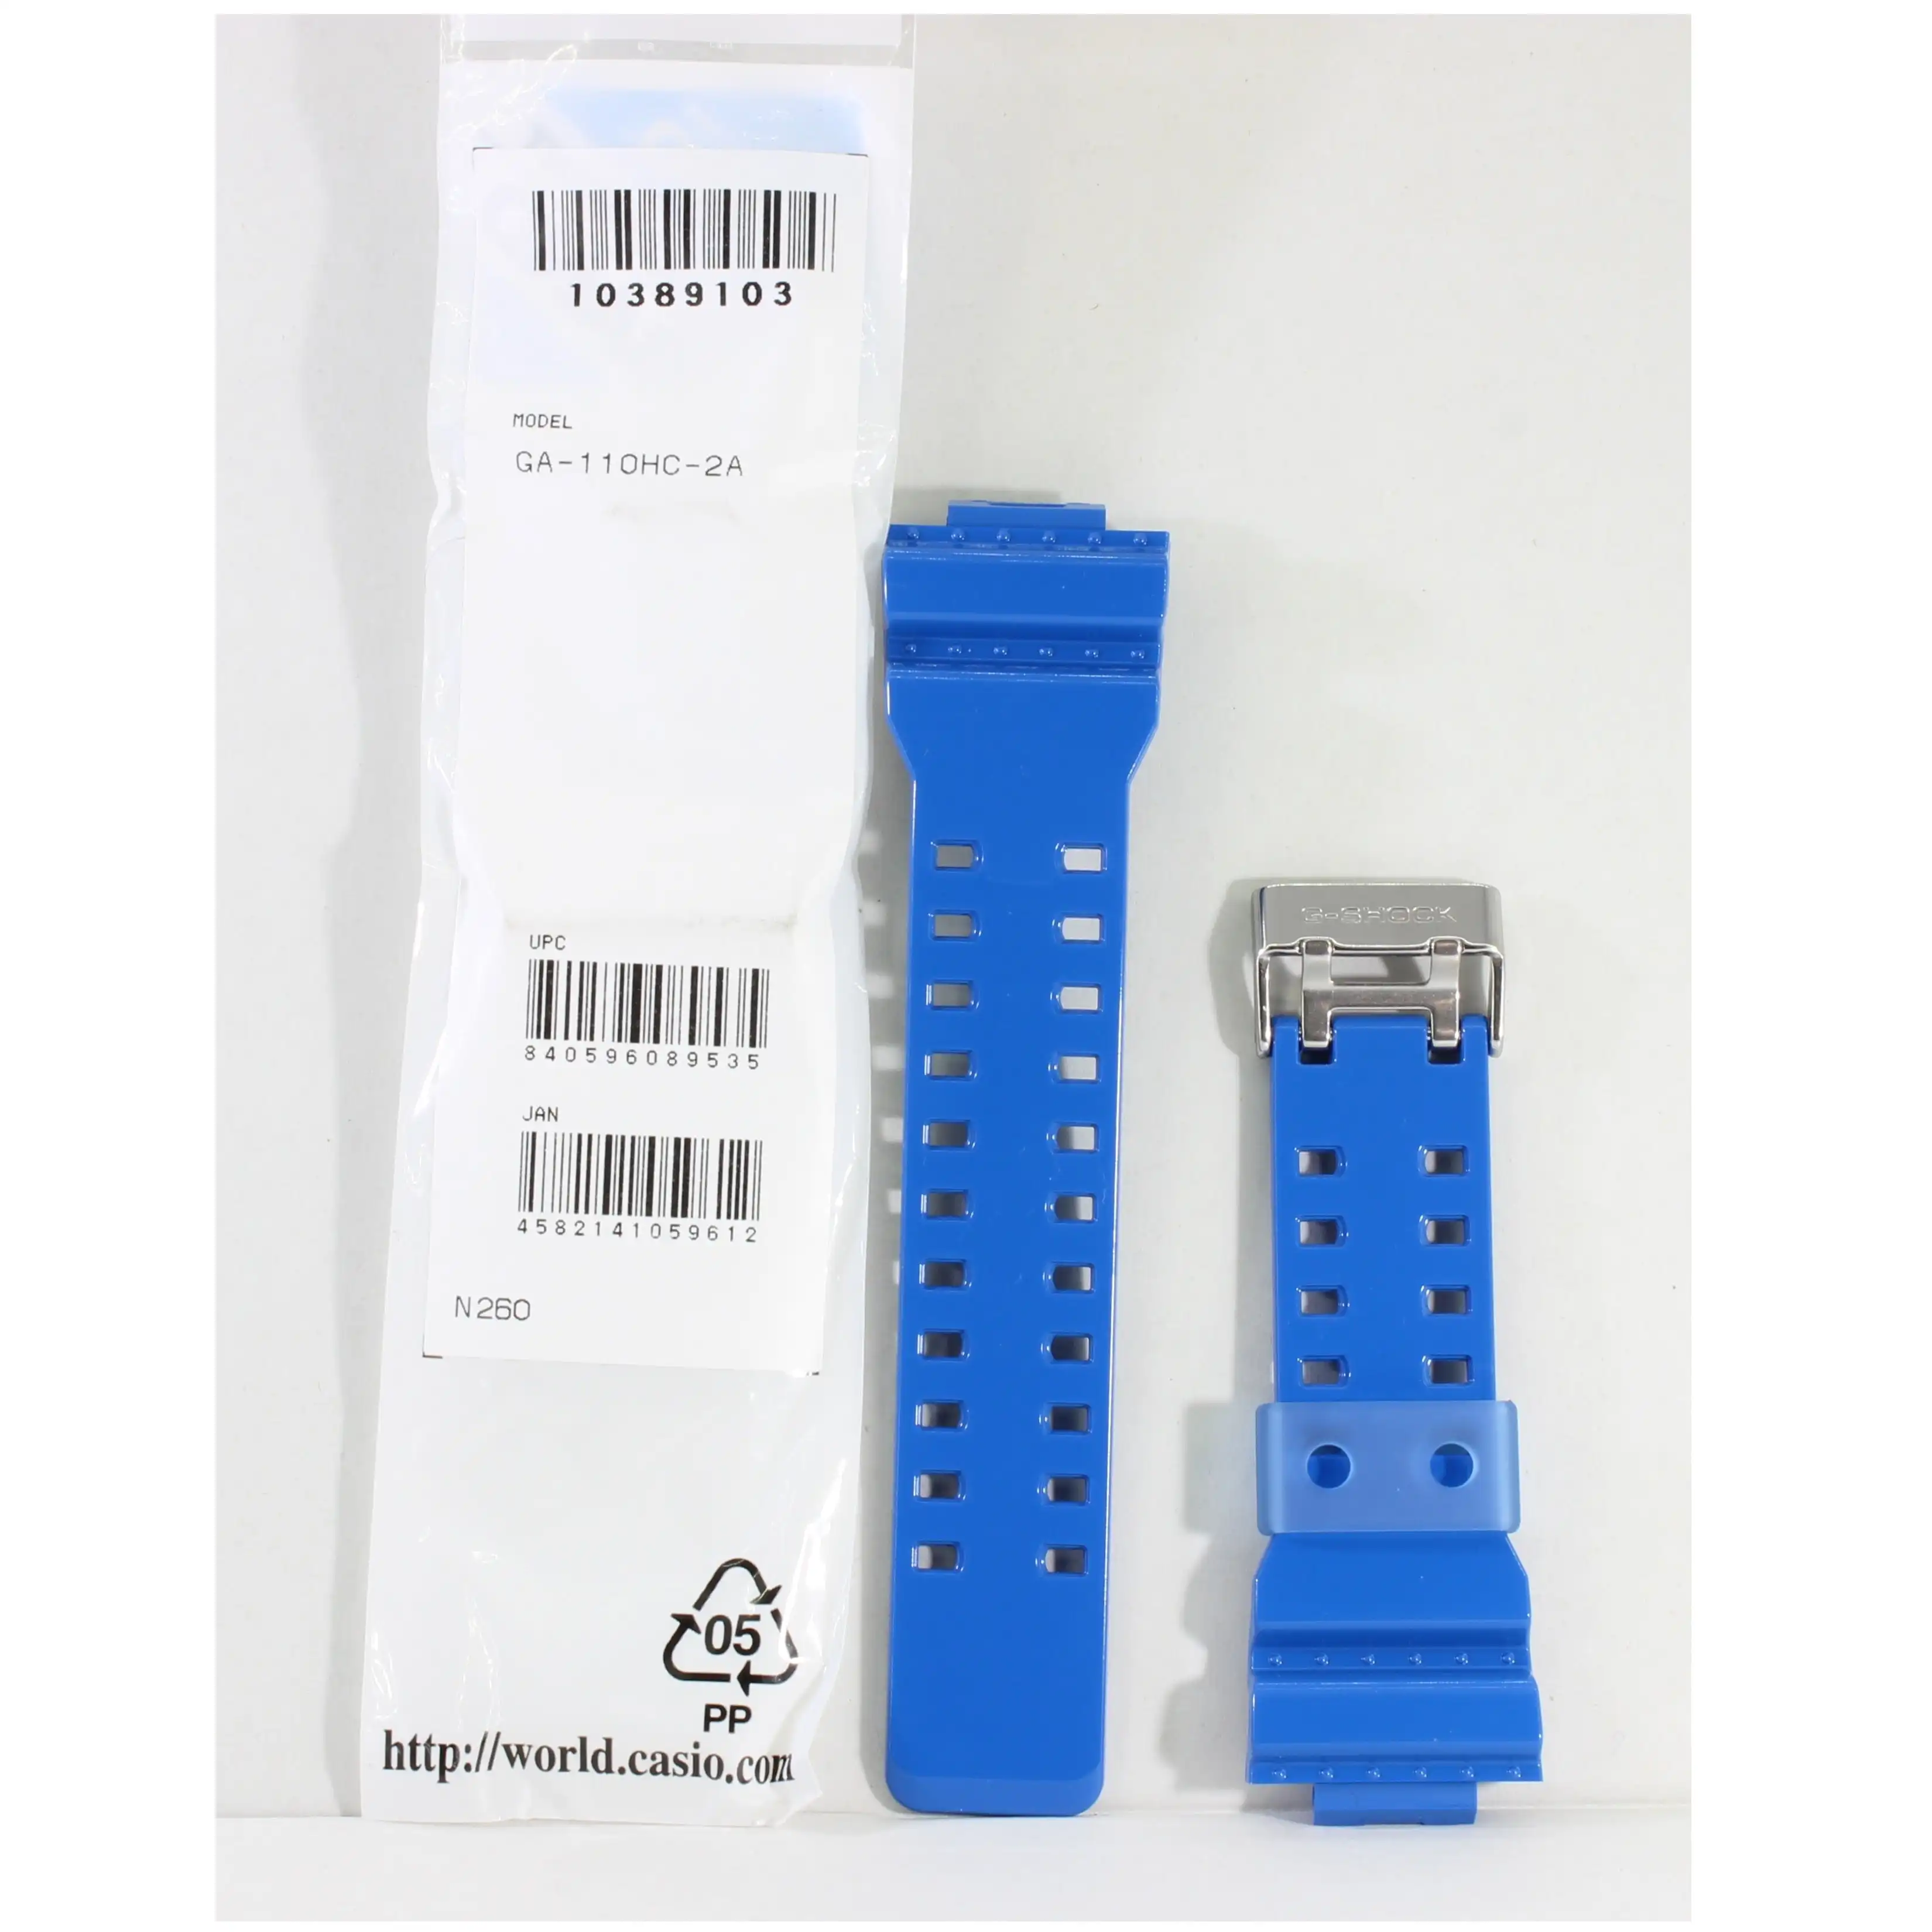 Casio G-Shock Shiny Blue Genuine Replacement Strap 10389103 to suit GA-110HC-2A